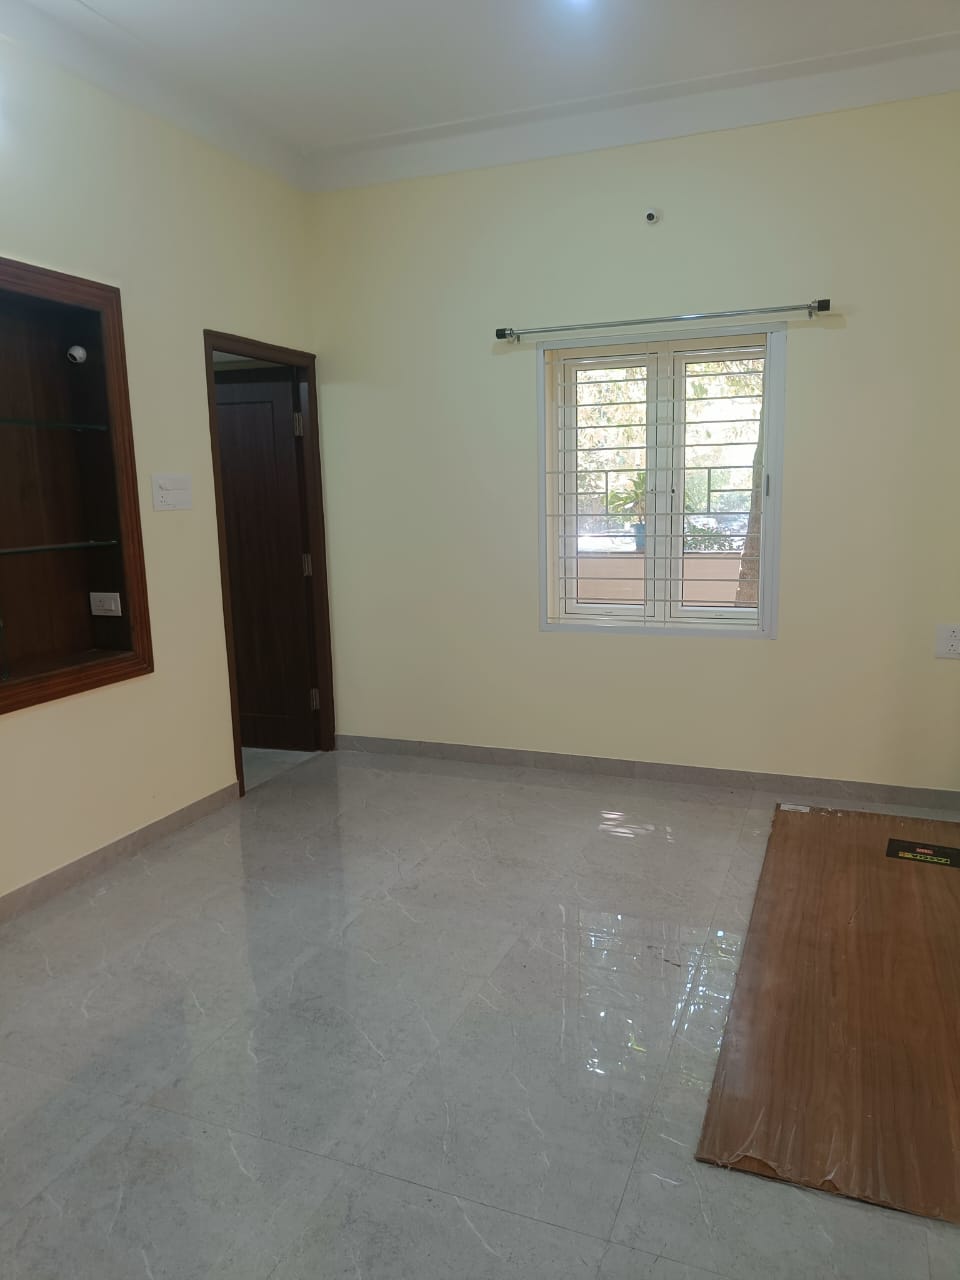 3 BHK Independent House for Lease Only at JAML2 - 2437 in Ganapathi Nagar